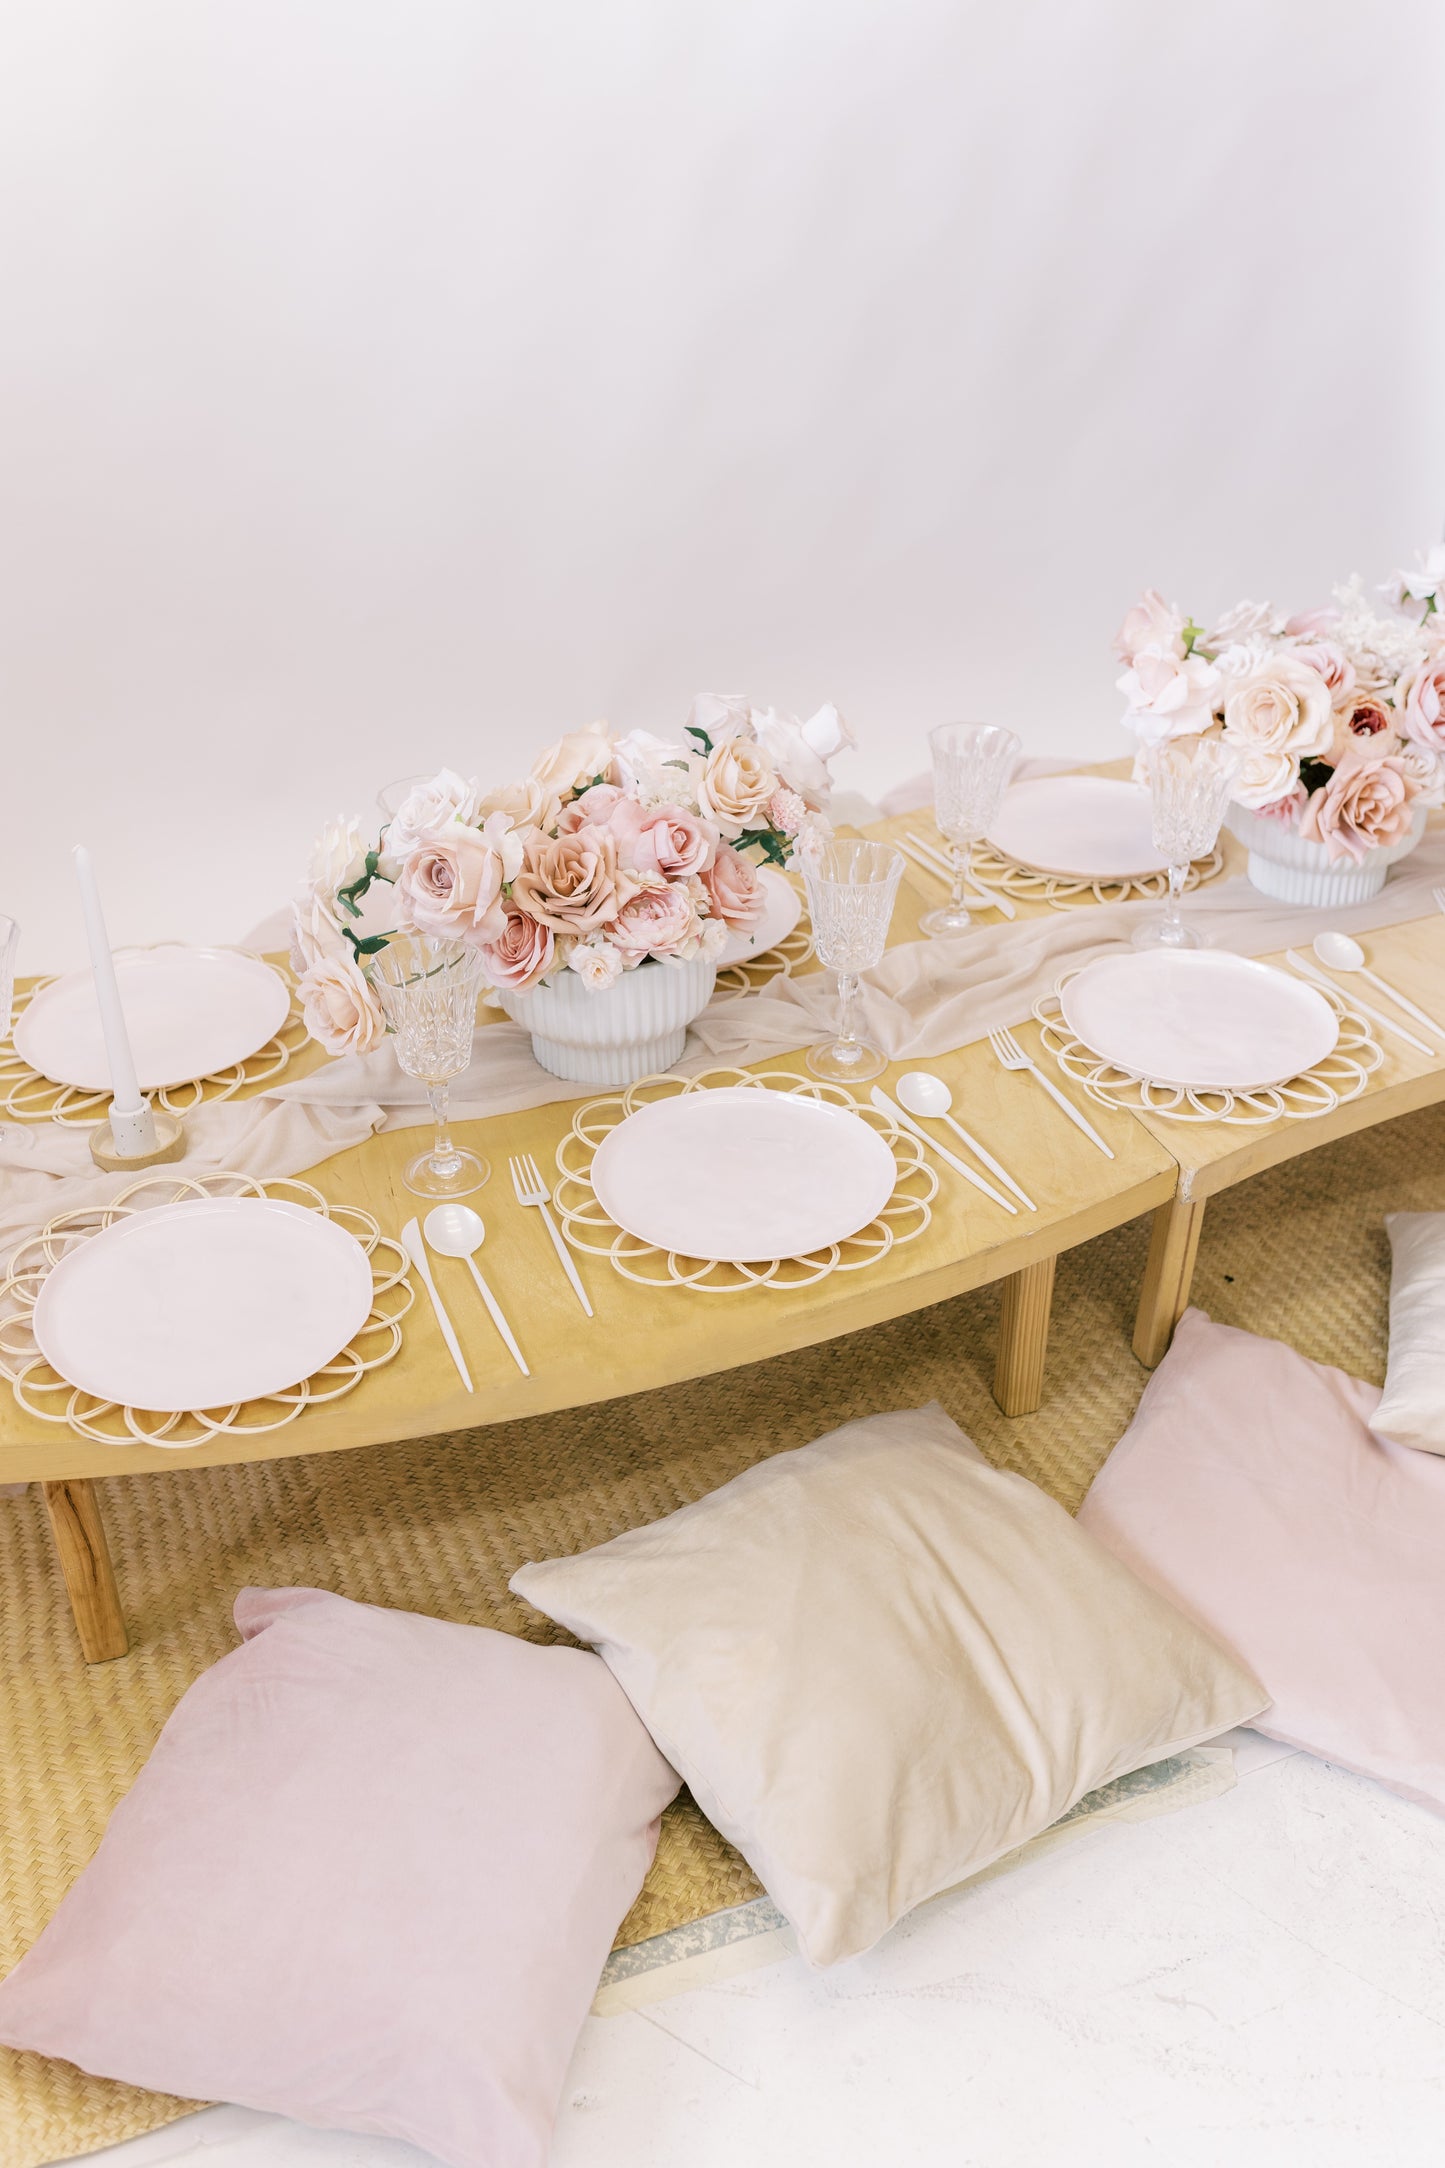 Dreamy Pink Picnic for 10 Guests or more